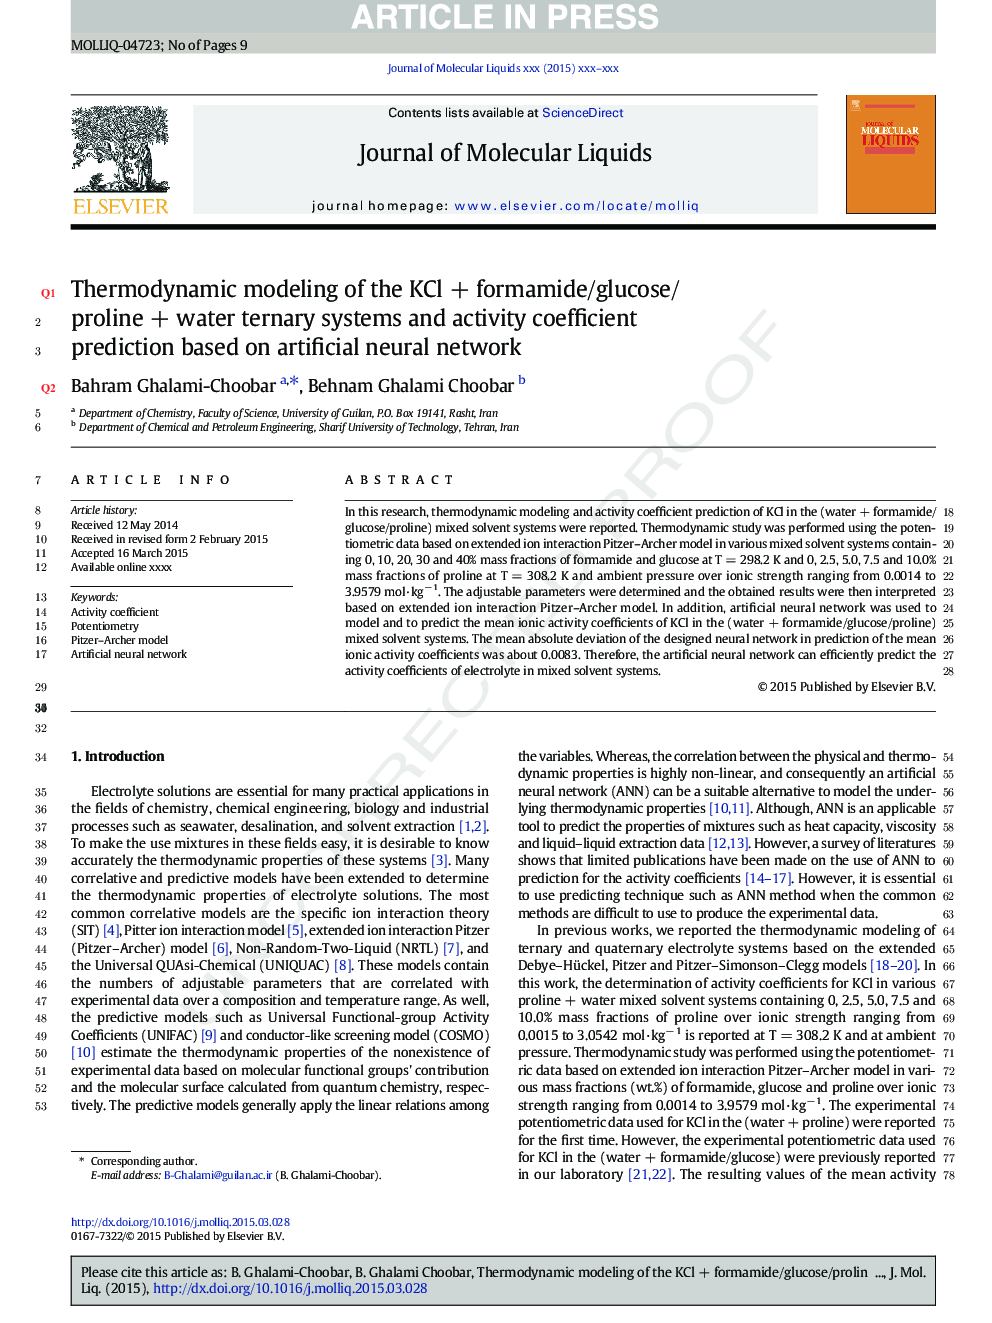 Thermodynamic modeling of the KClÂ +Â formamide/glucose/prolineÂ +Â water ternary systems and activity coefficient prediction based on artificial neural network